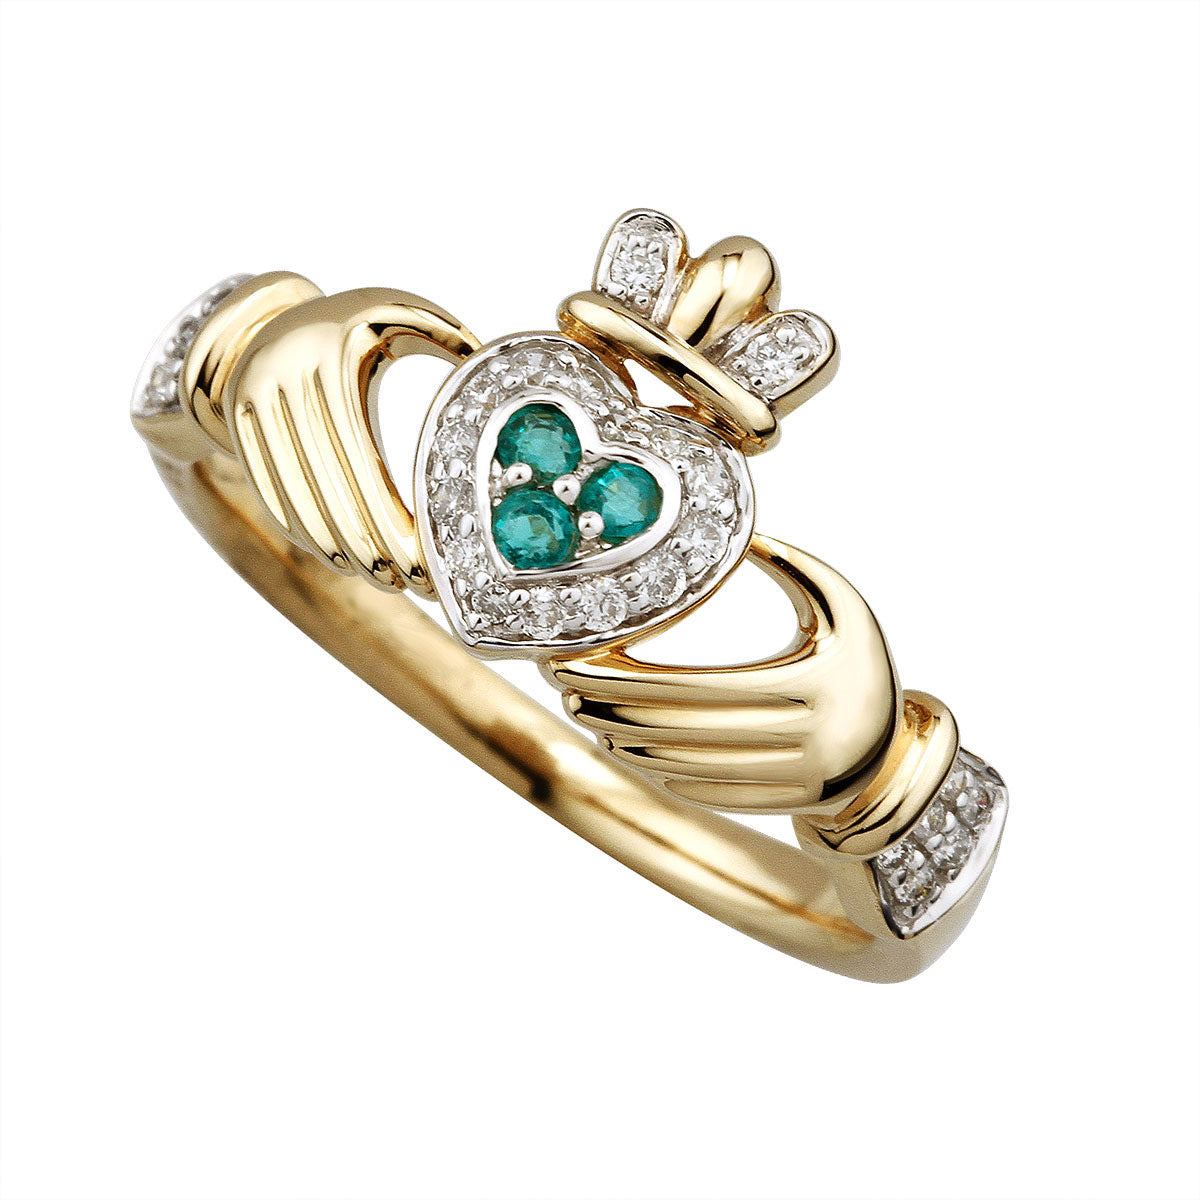 14K gold diamond and emerald set claddagh ring s2945 from Solvar